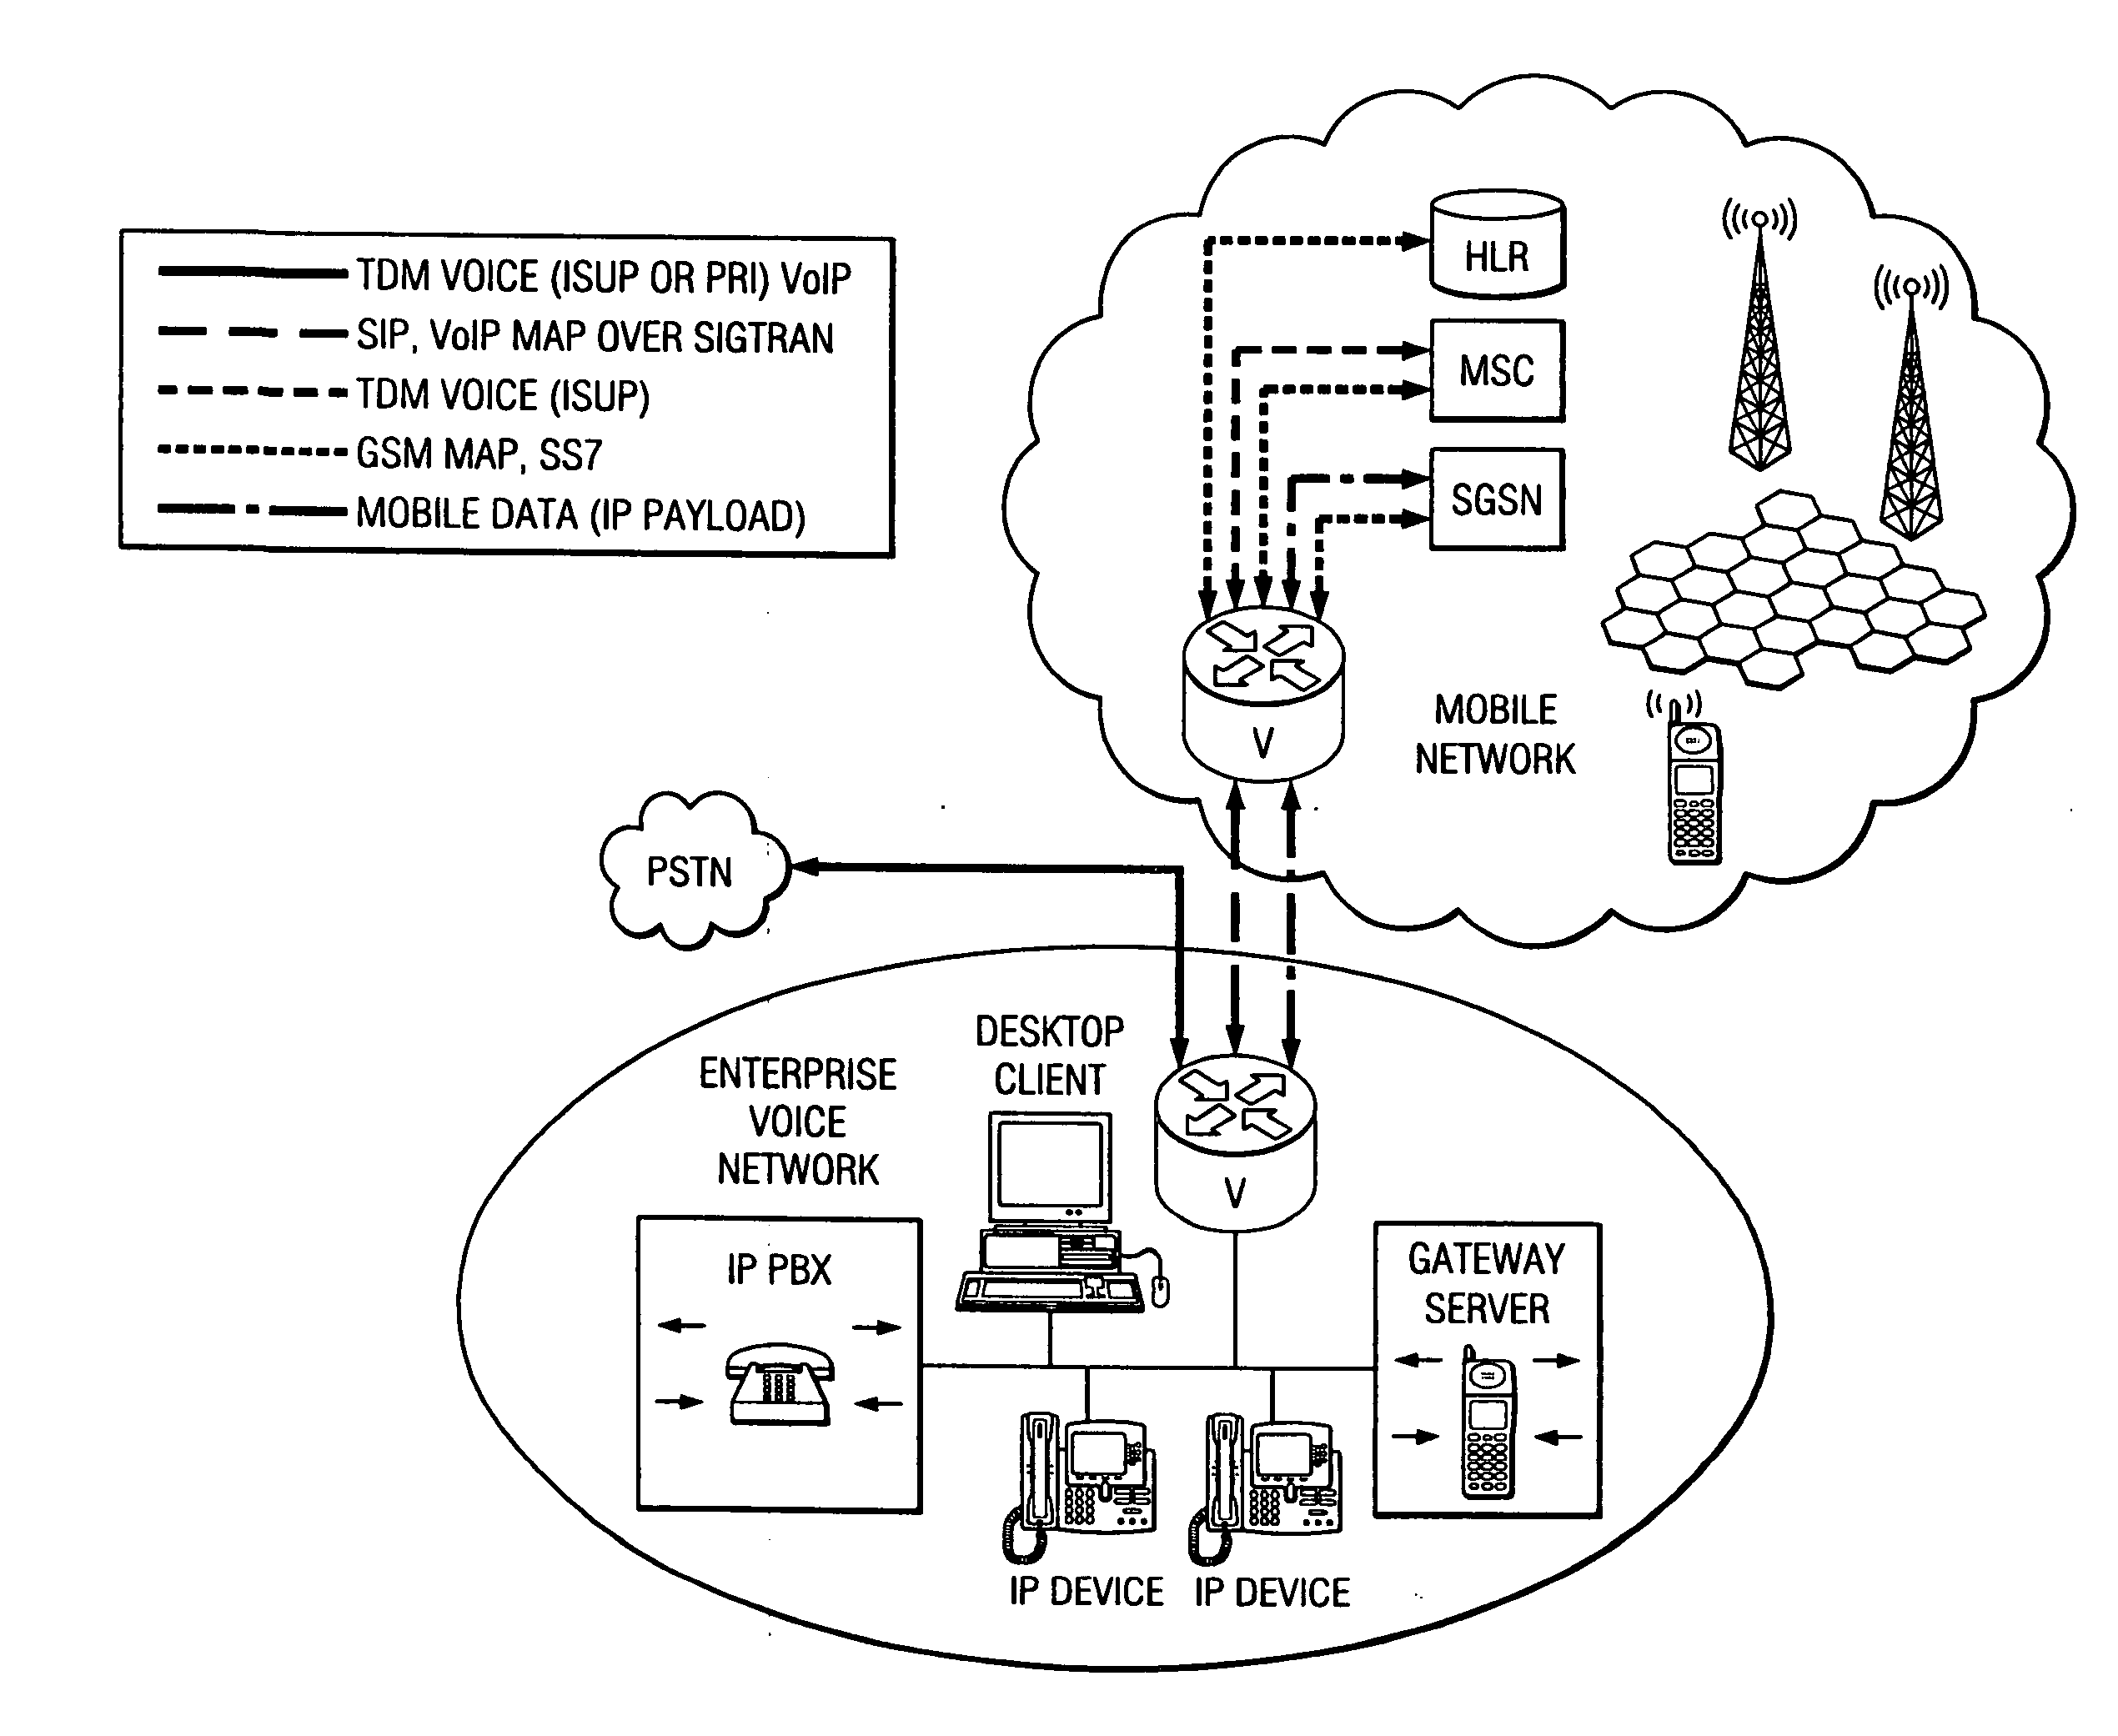 System and method for enabling call originations using SMS and hotline capabilities